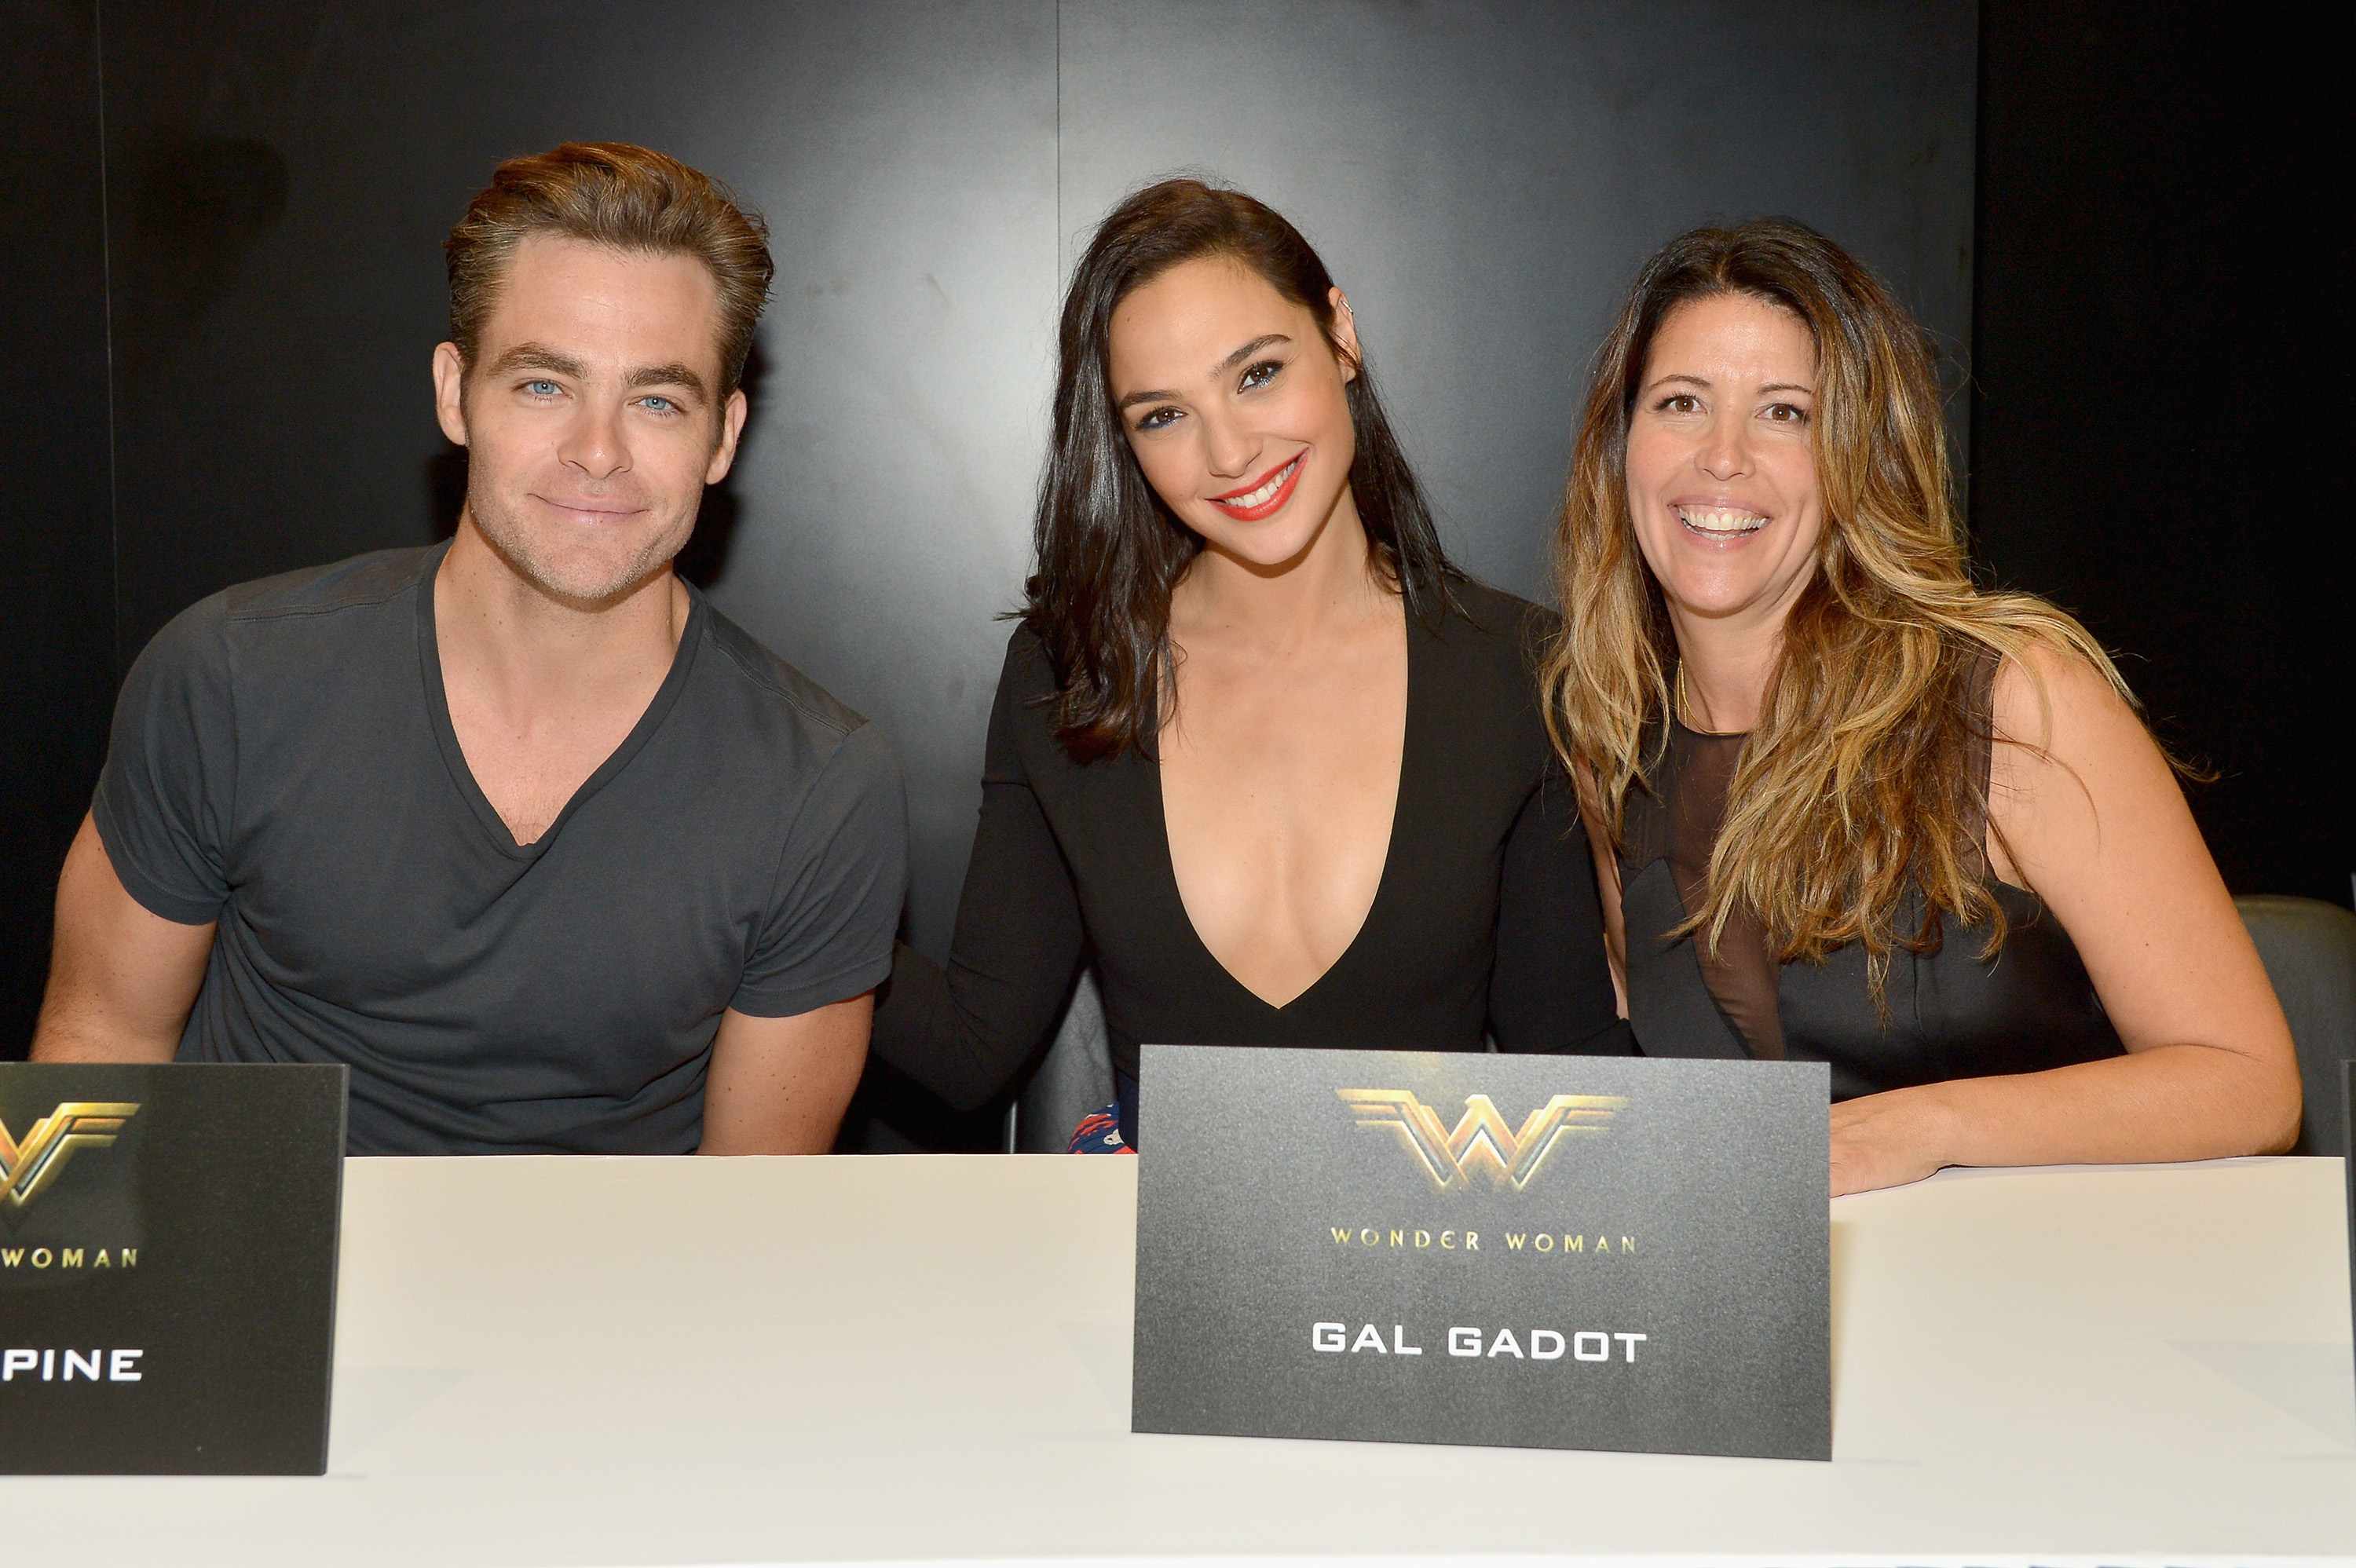 SAN DIEGO, CA - JULY 23: (L-R) Actors Chris Pine, Gal Dagot and director Patty Jenkins from the 2017 feature film Wonder Woman attend a cast signing autograph session for fans in DC's 2016 San Diego Comic-Con booth at San Diego Convention Center on July 23, 2016 in San Diego, California. (Photo by Charley Gallay/Getty Images for DC Entertainment) *** Local Caption *** Patty Jenkins;Chris Pine;Gal Dagot